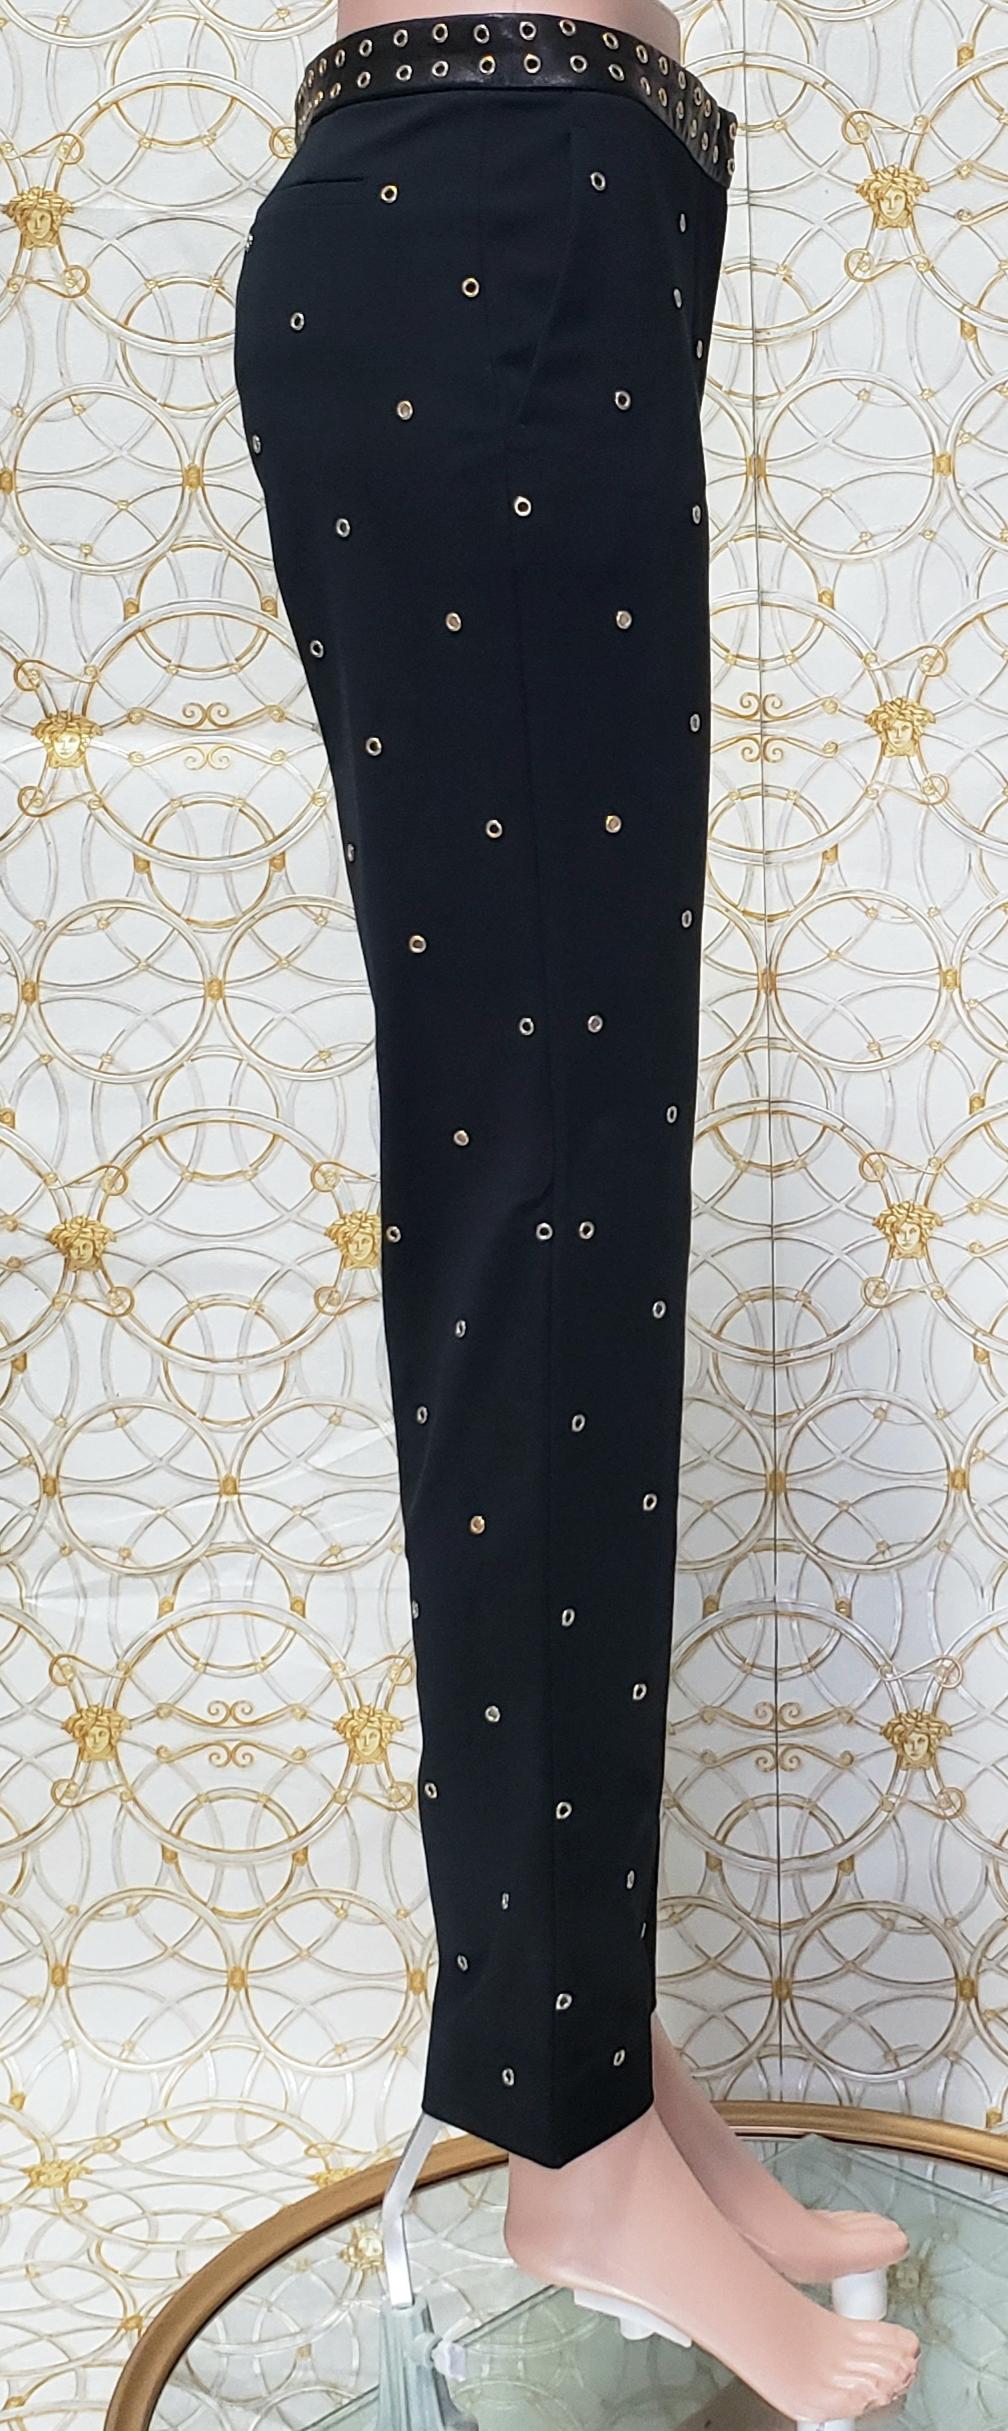 Resort 2012 Look # 5 VERSACE BLACK STRETCHY PANTS with RIVETS size 38 - 2 In New Condition For Sale In Montgomery, TX